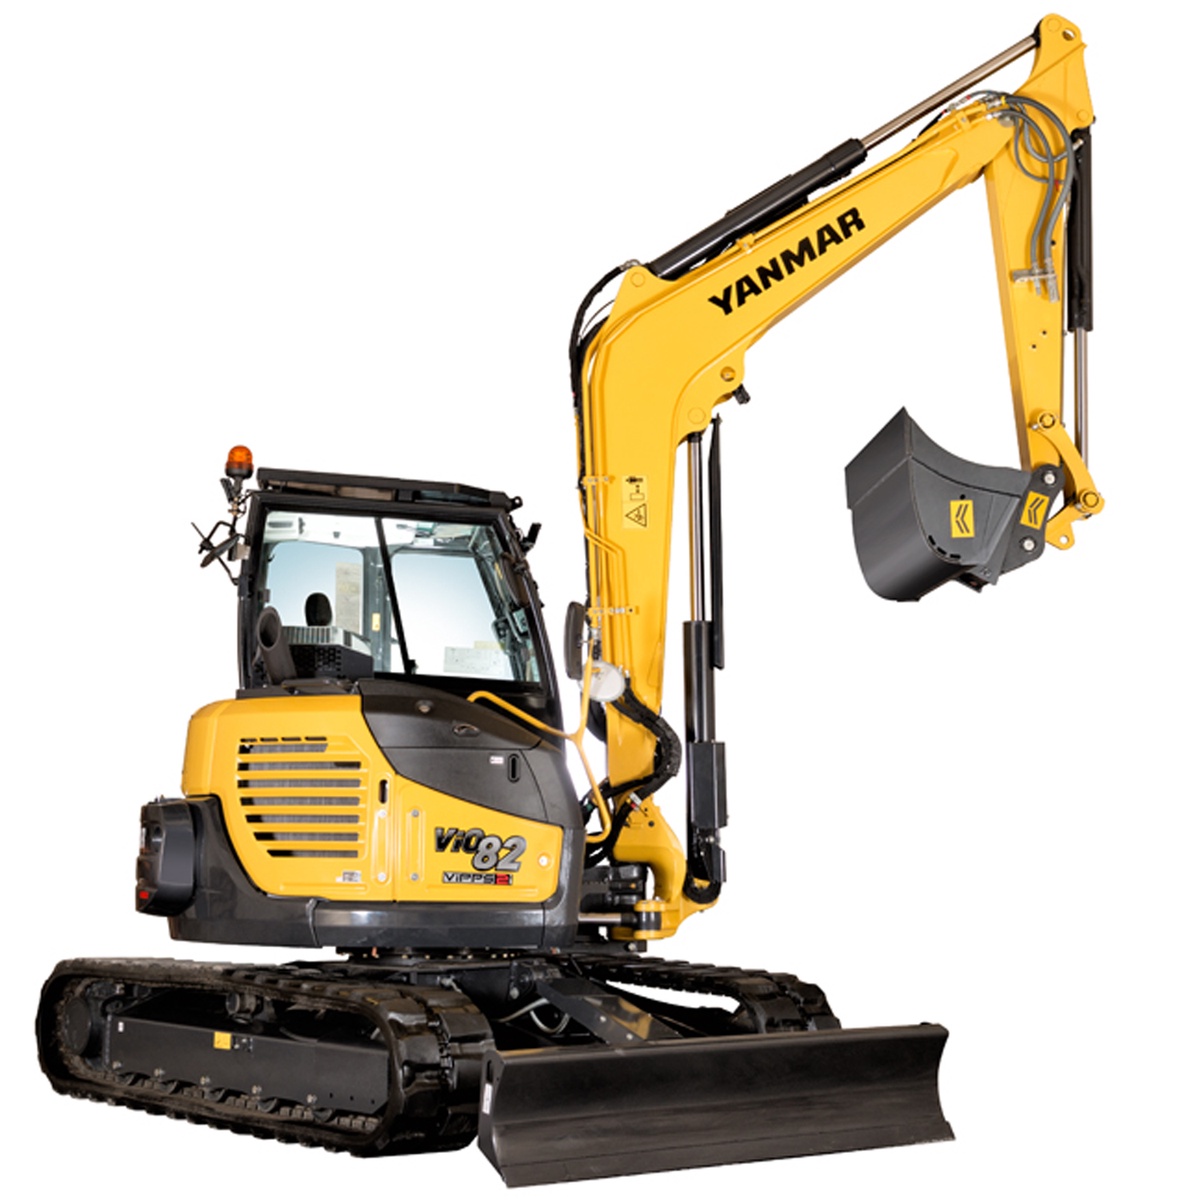 How Can I Find YANMAR Service Manuals Online?